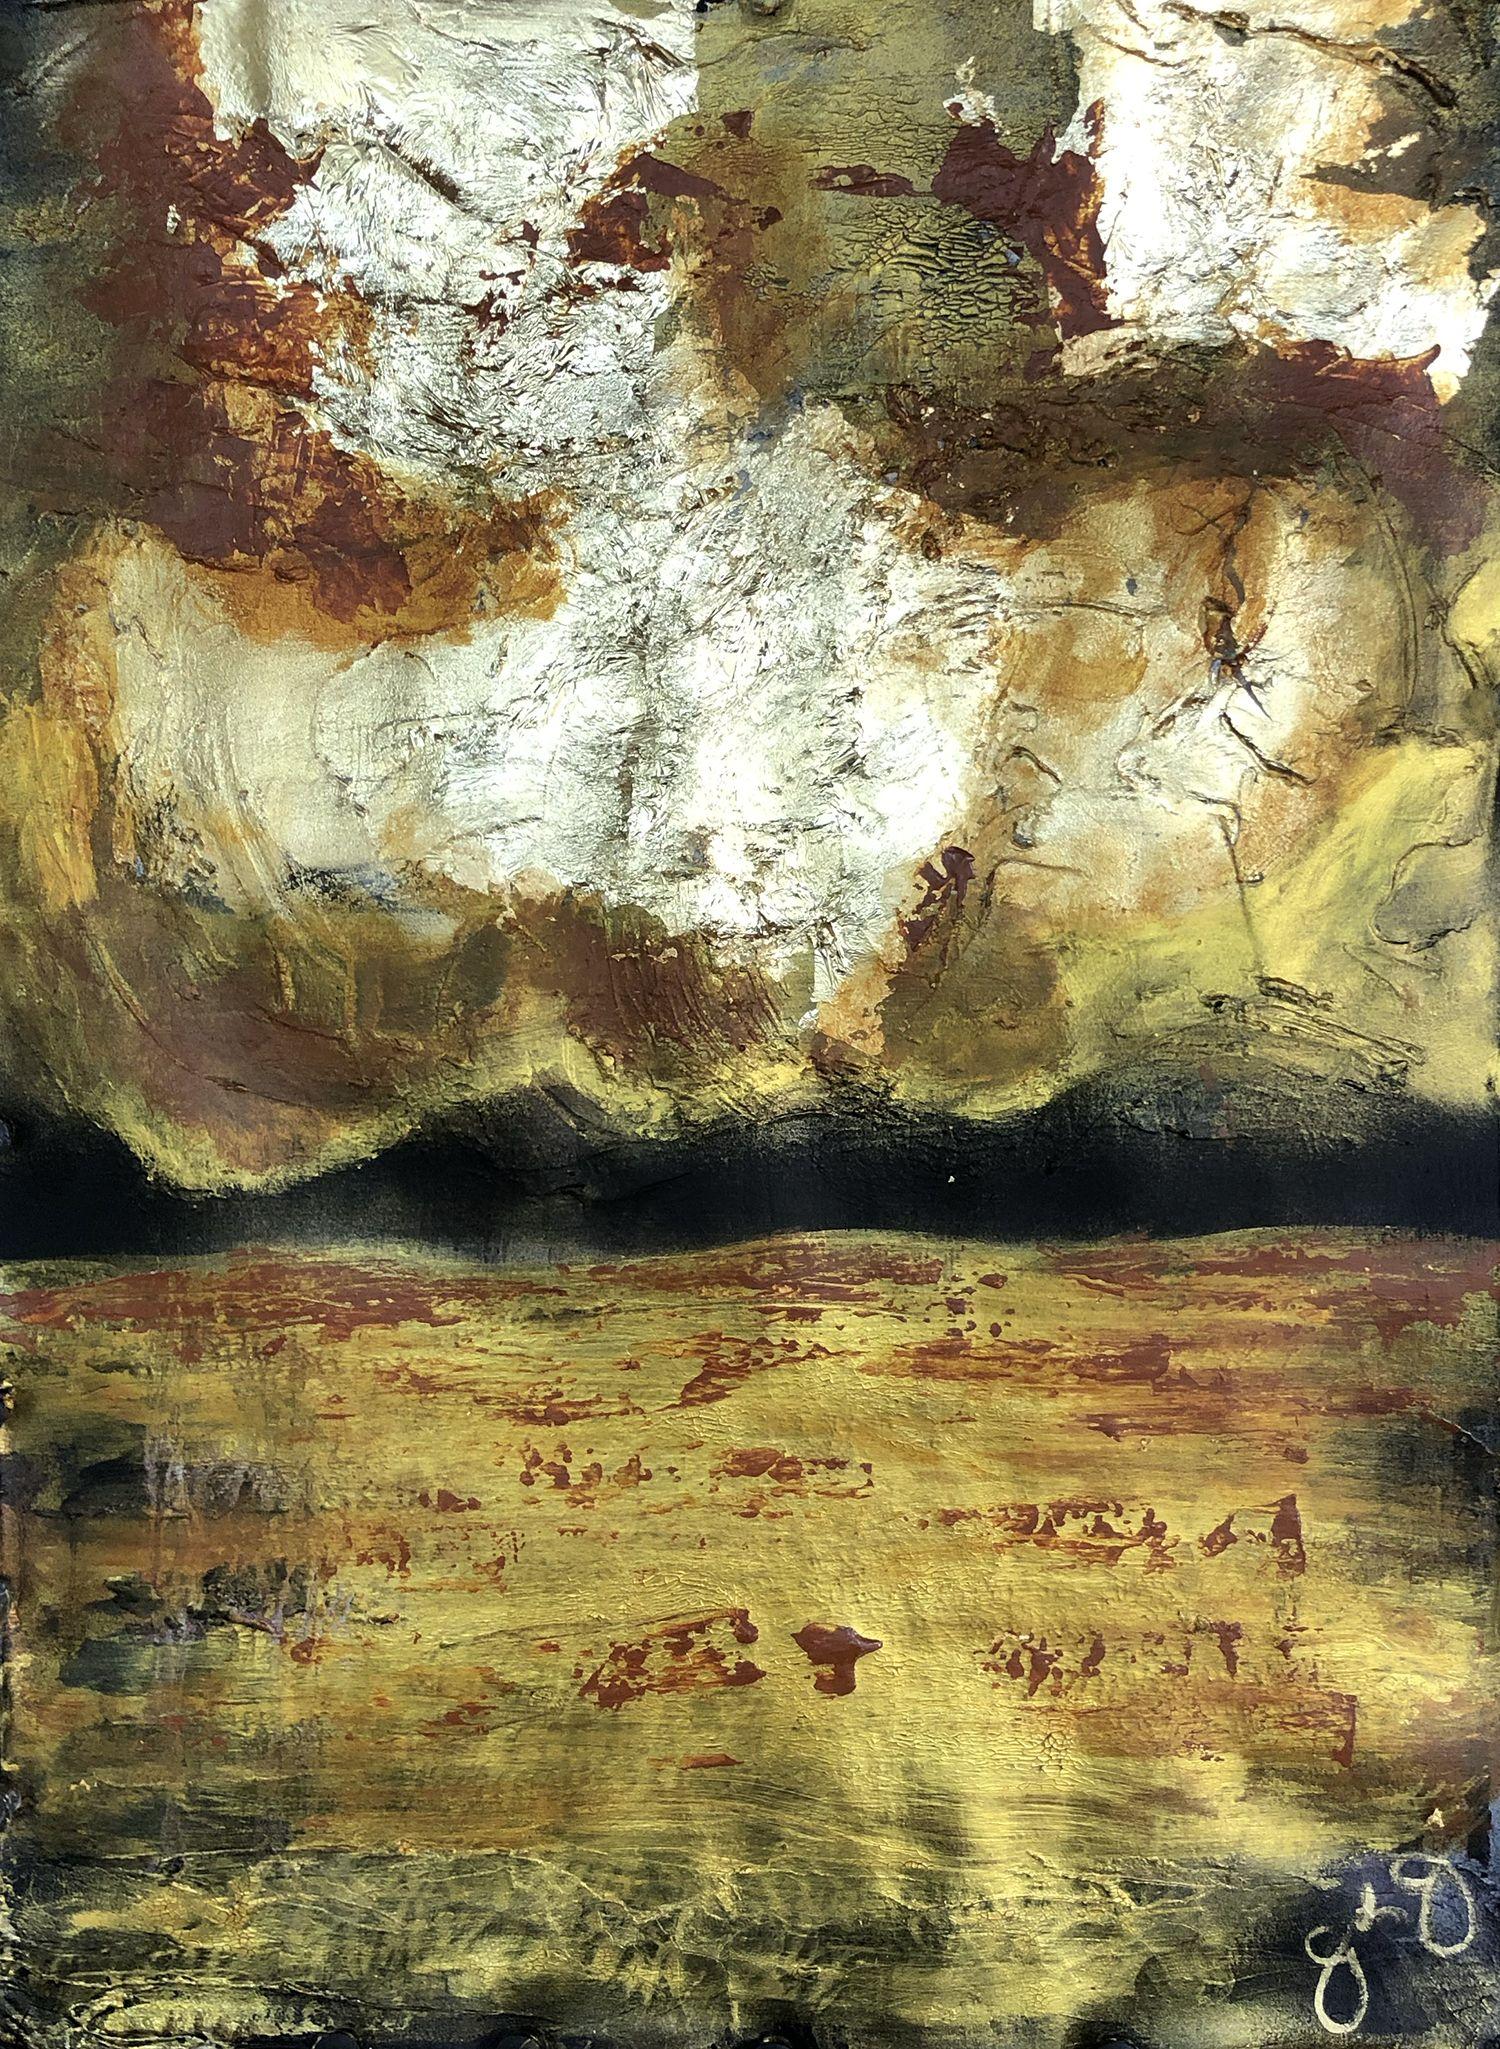 gaia 59, Mixed Media on Paper - Mixed Media Art by Jason Lincoln Jeffers